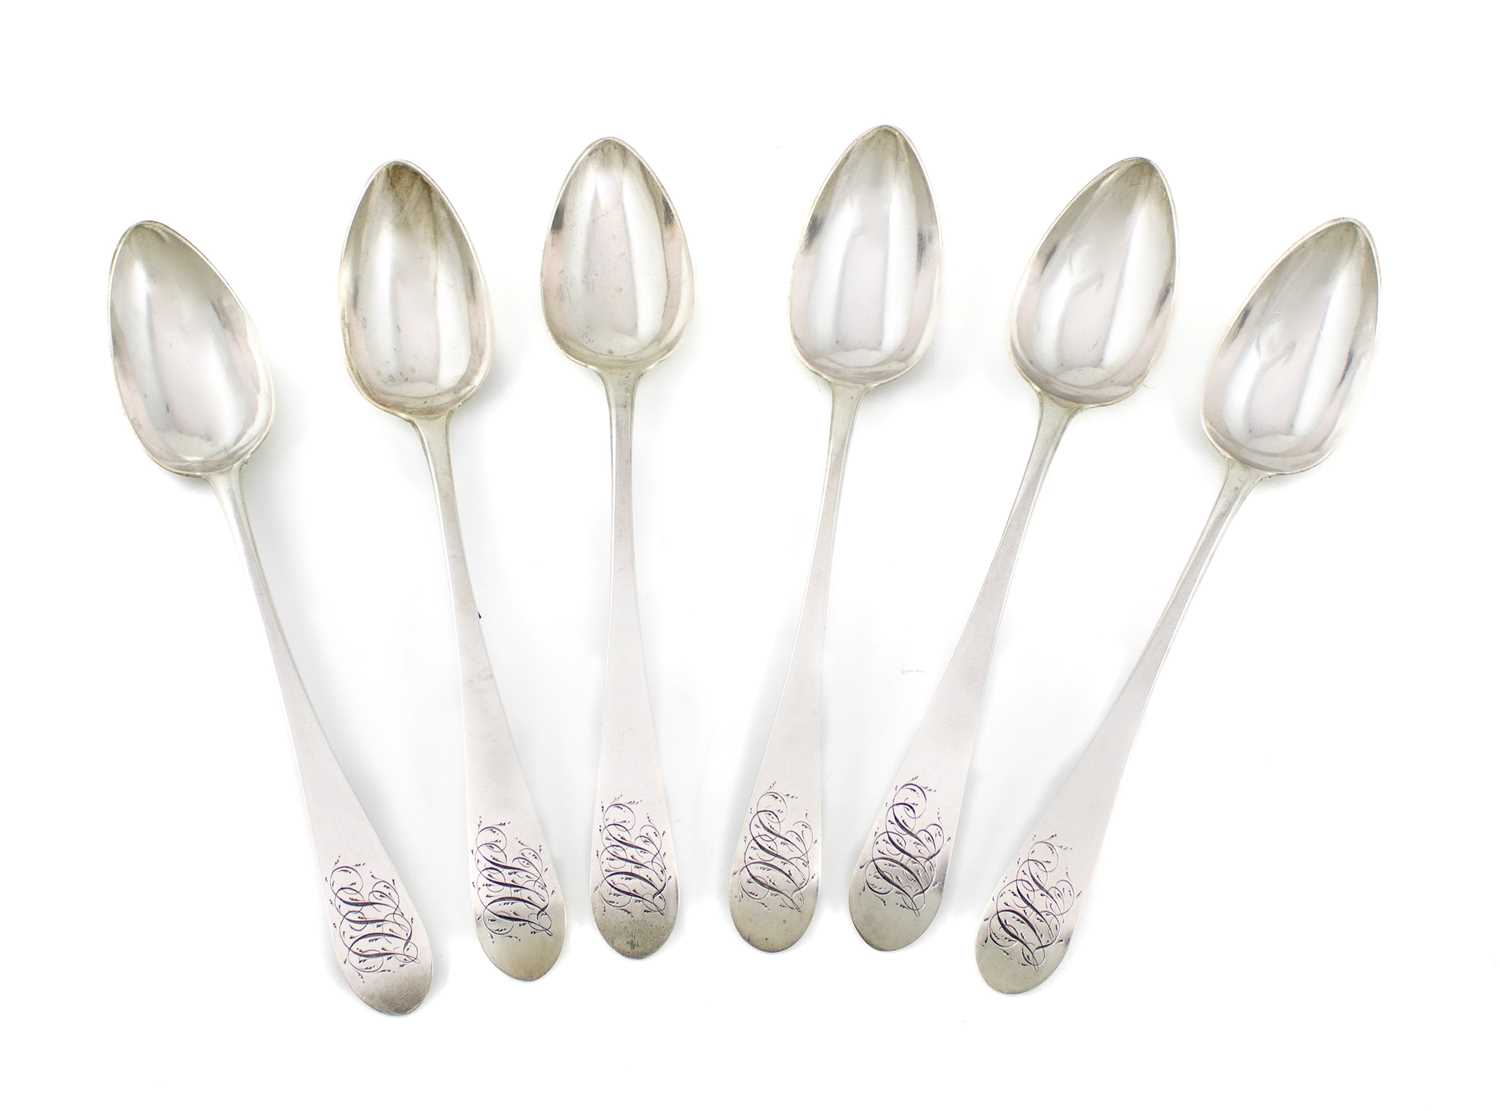 A set of six 19th century American silver teaspoons, stamped Z.Owen, with engraved initials to the